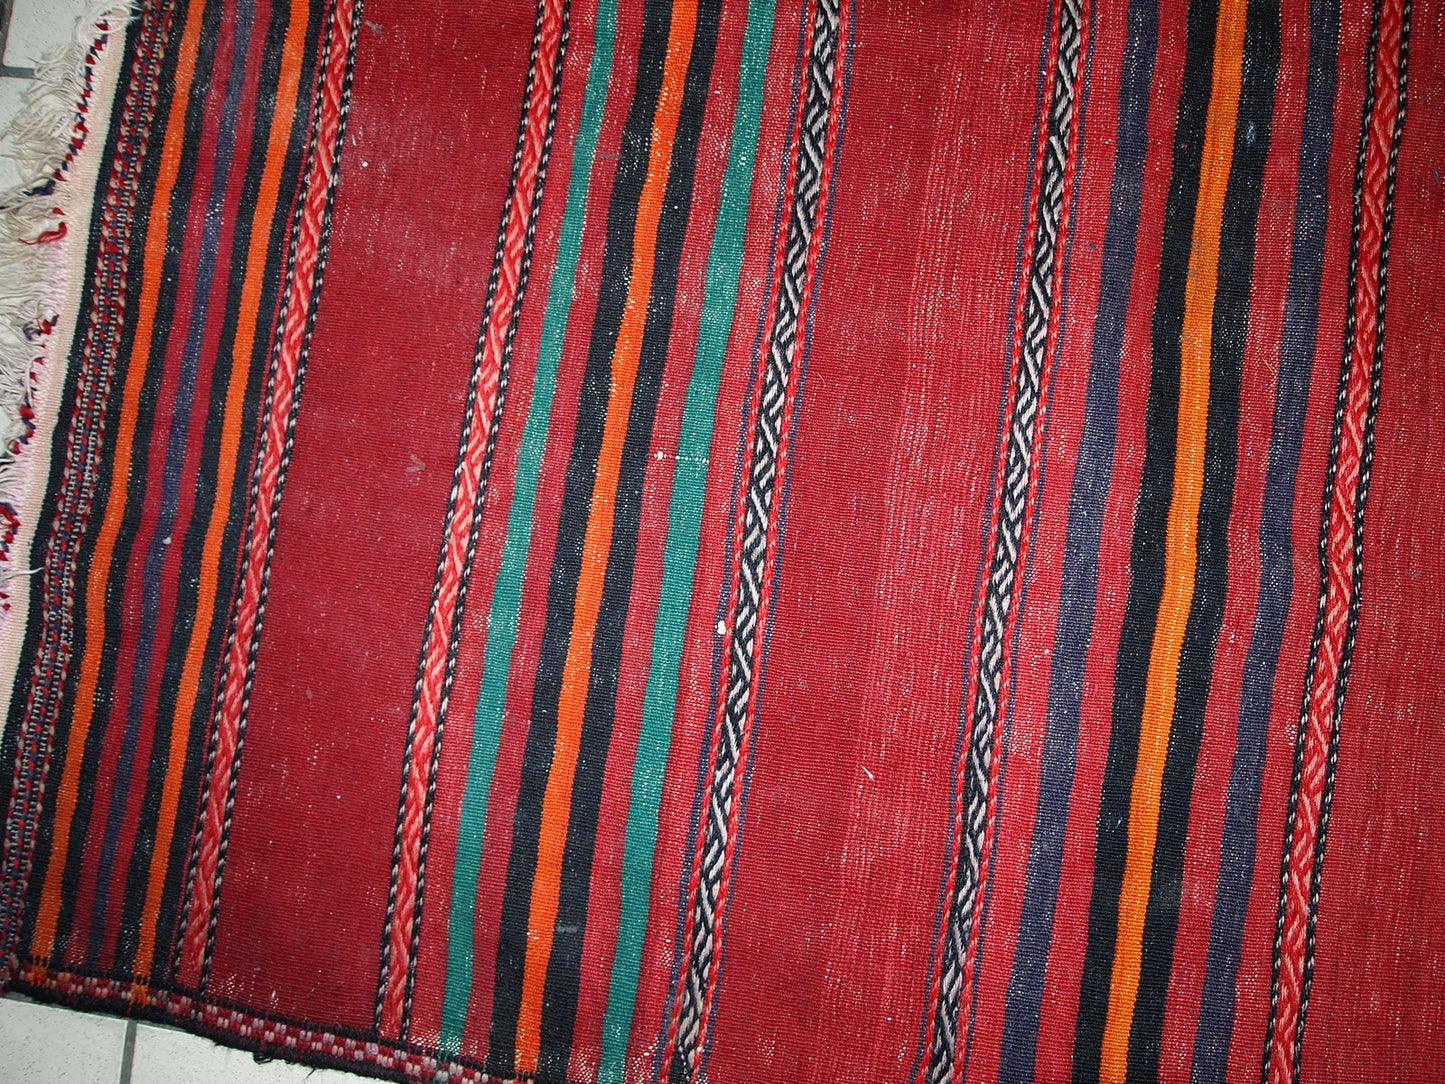 Handmade vintage Persian kilim in red shade with stripes. This kilim is in original condition, has some signs of age.